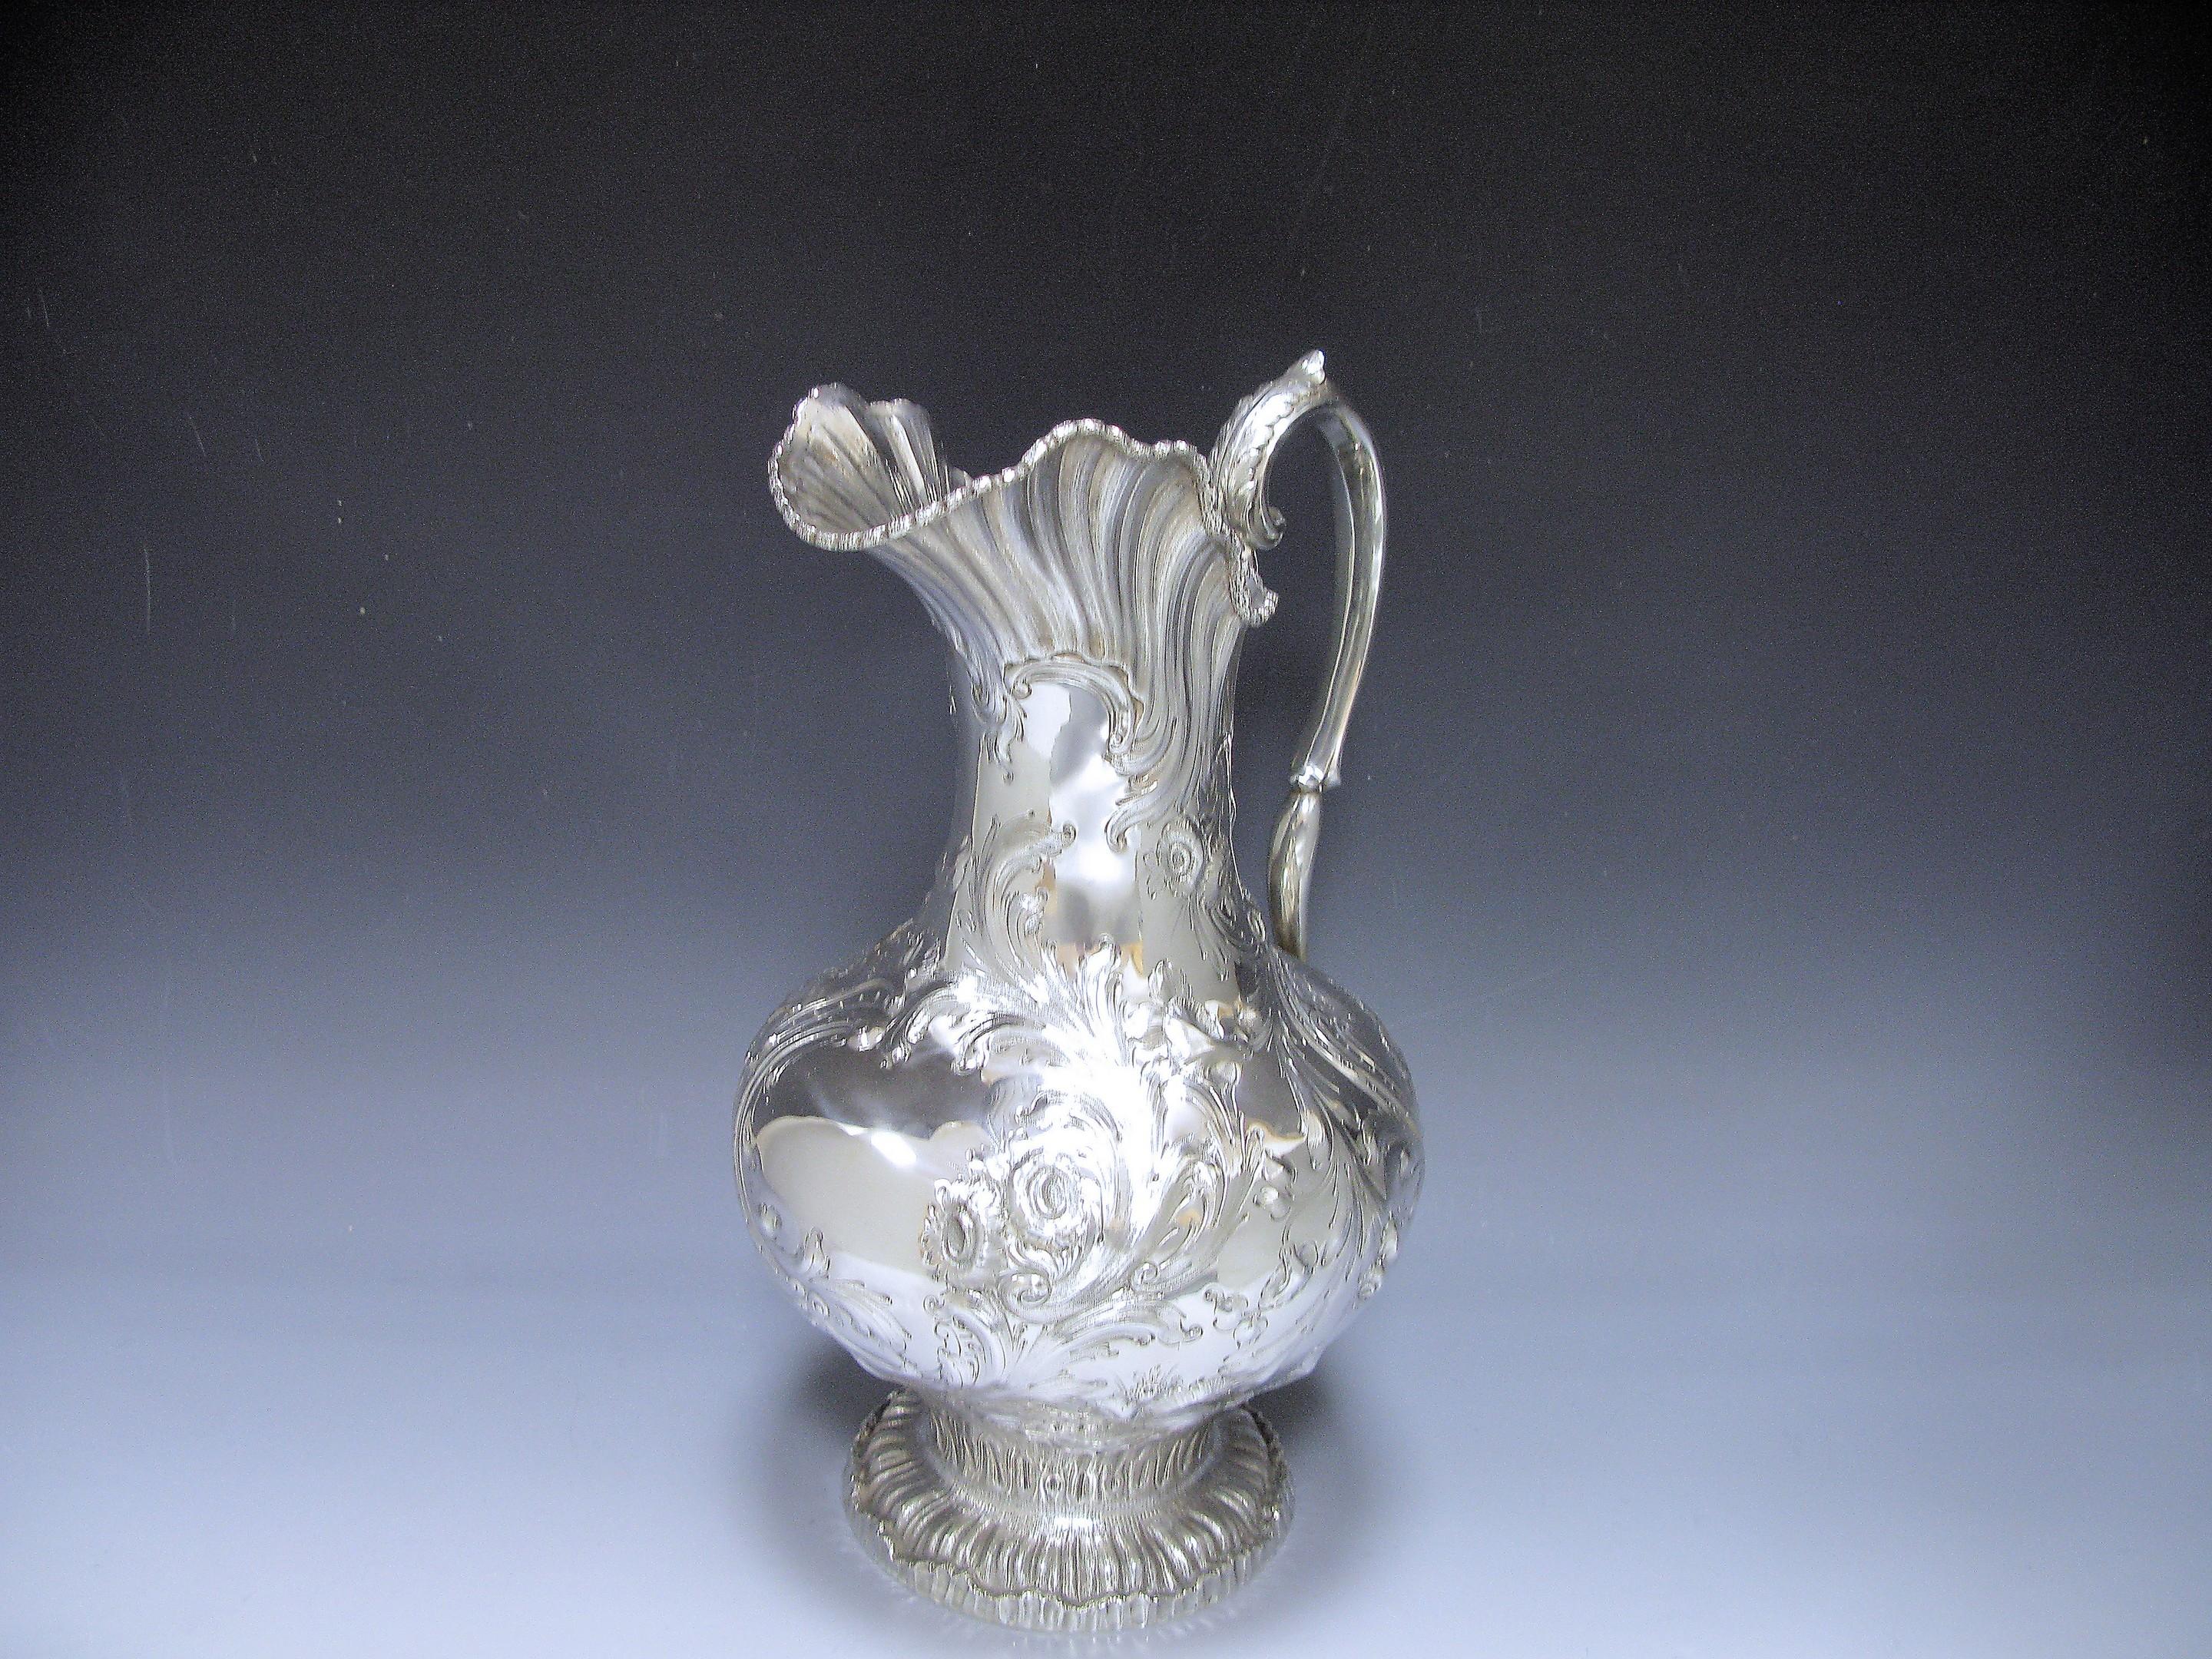 A magnificent Silver Water Jug / Ewer made by John Chandler Moore for Allcock & Allen of New York. The body of the jug is of baluster form with castellated leaf embellished rim, leaf –caped ornate scroll handles with leafy junctions, the body is